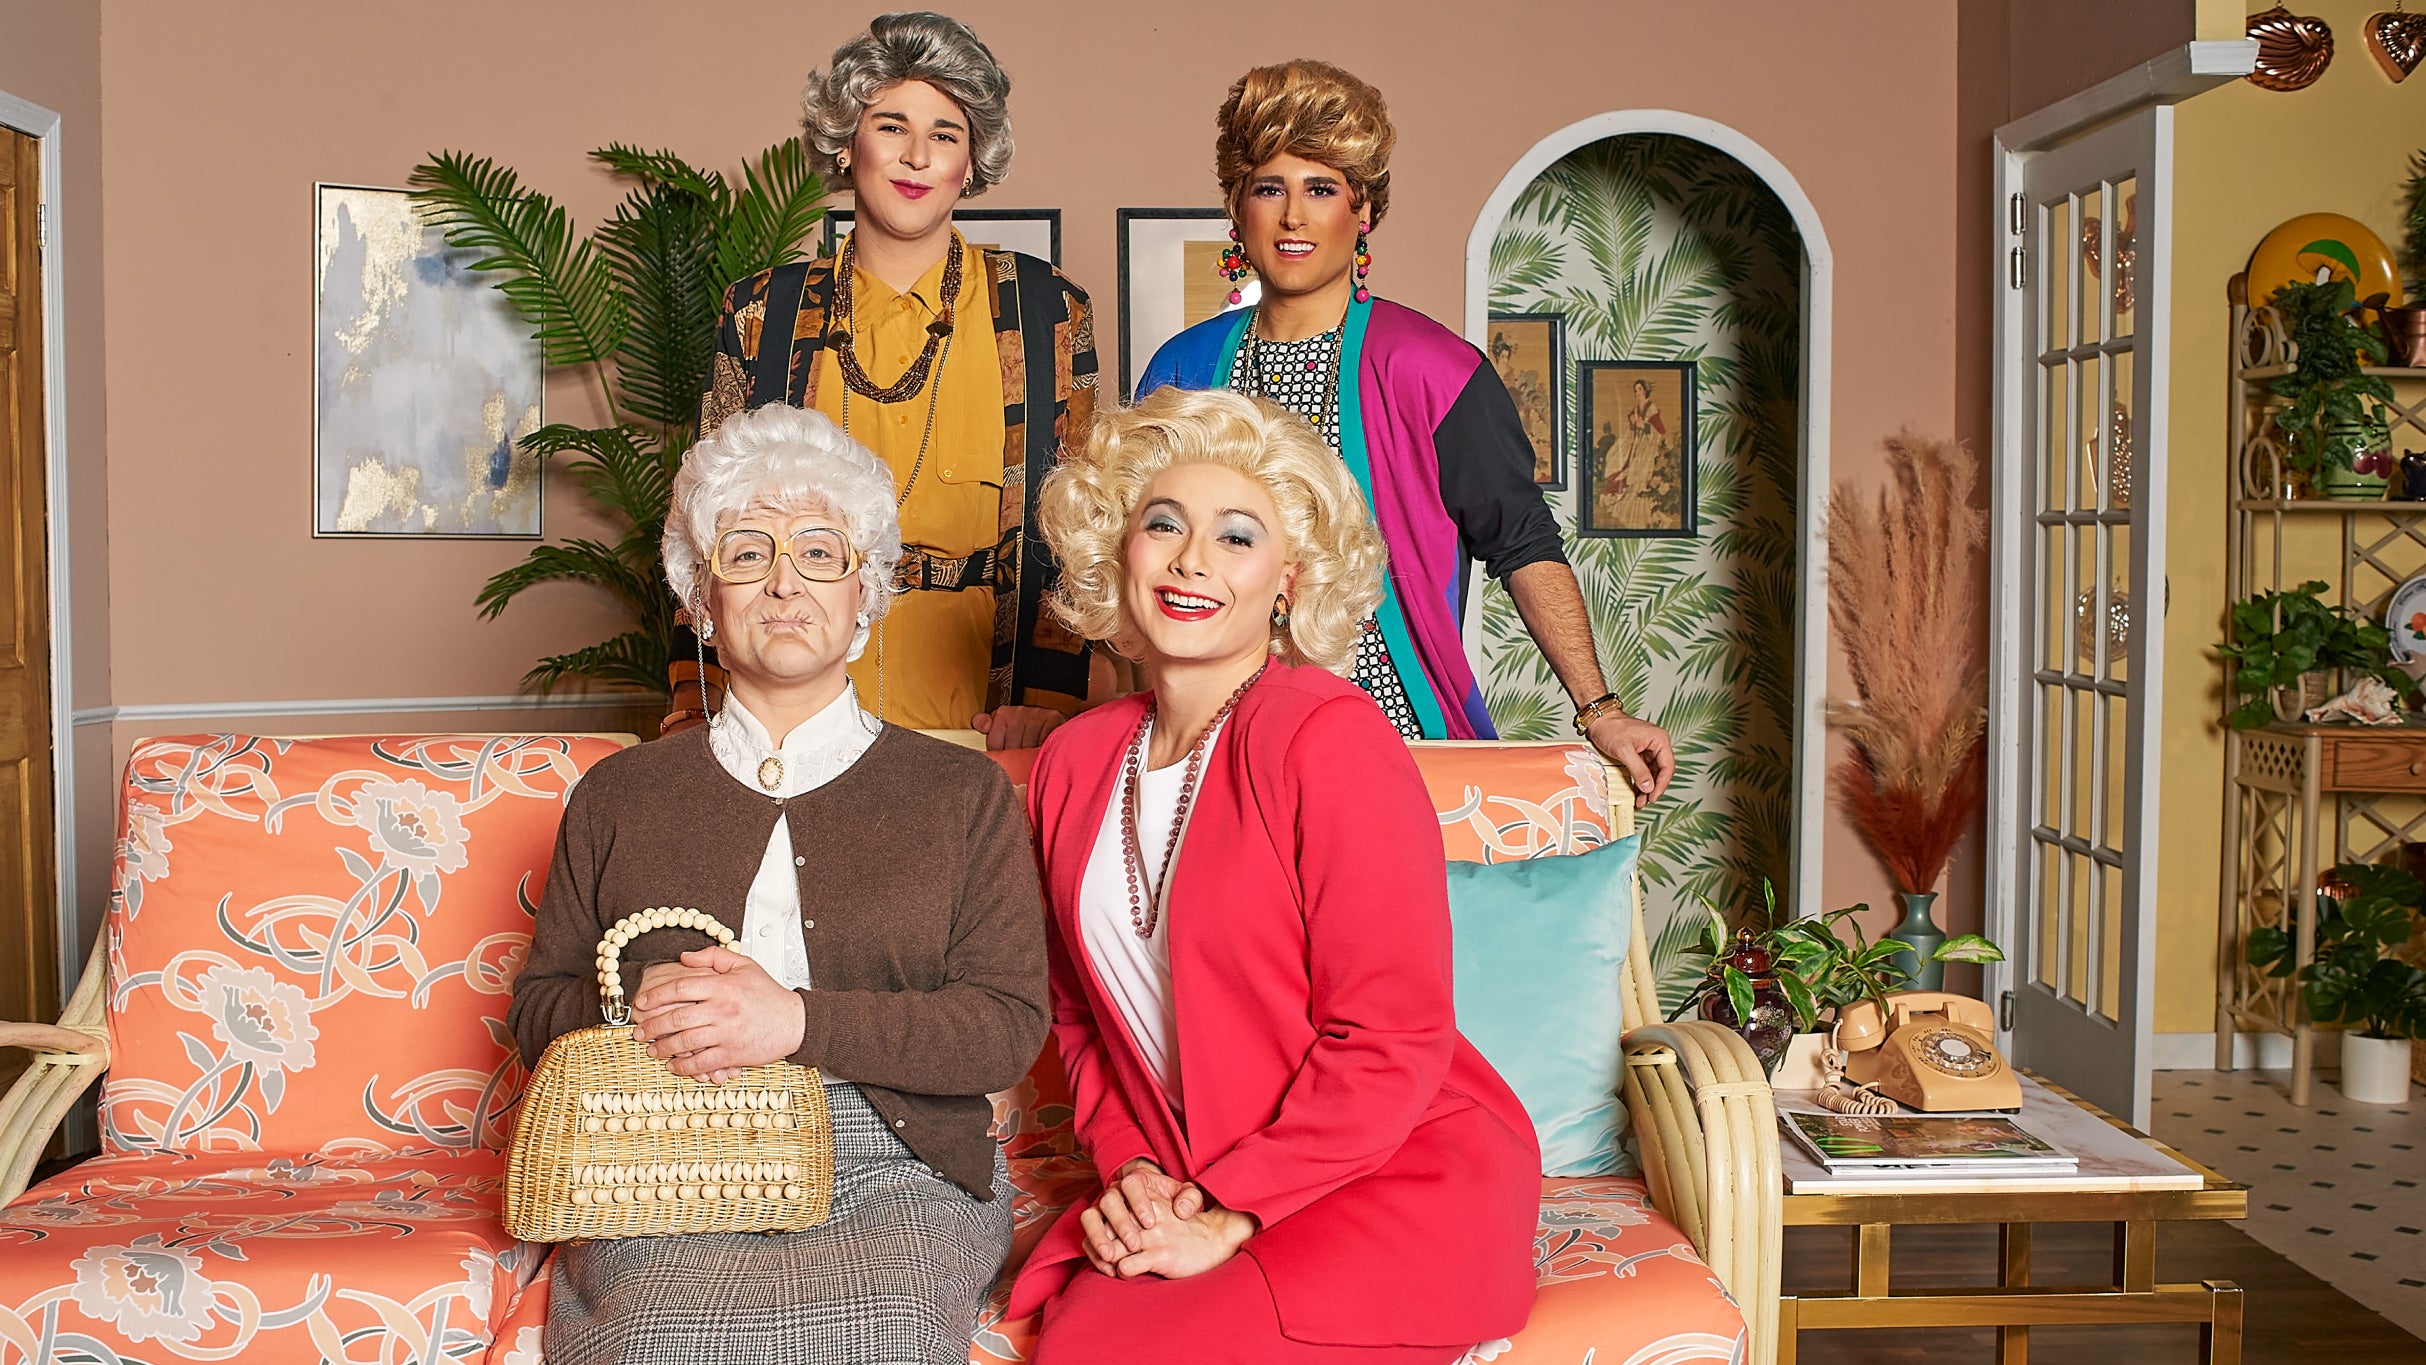 Golden Girls: The Laughs Continue (Chicago) in Chicago promo photo for BIC Club presale offer code